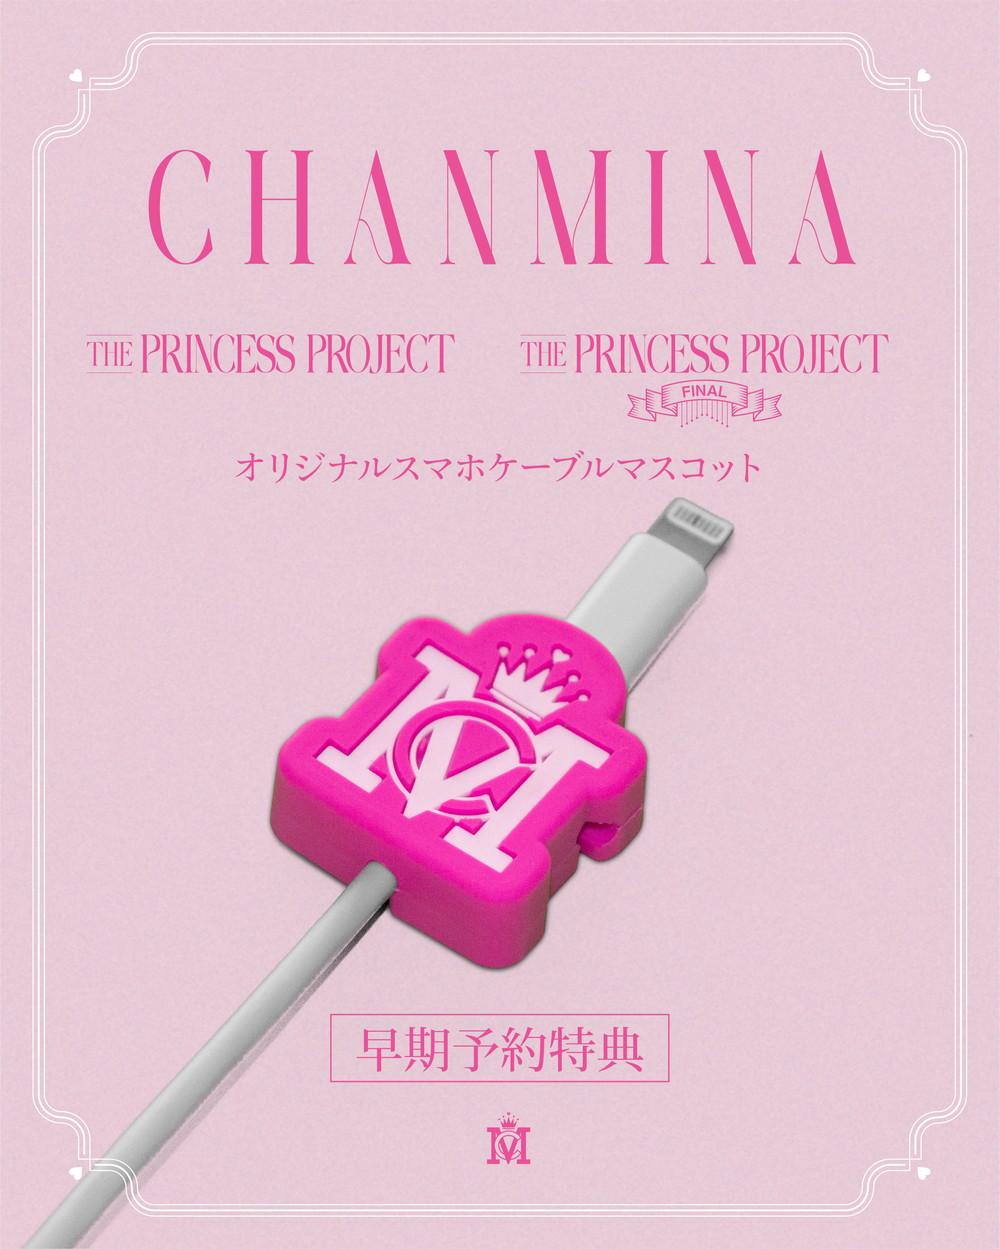 Chanmina's first full-length live screening of the video work containing the Nippon Budokan performance